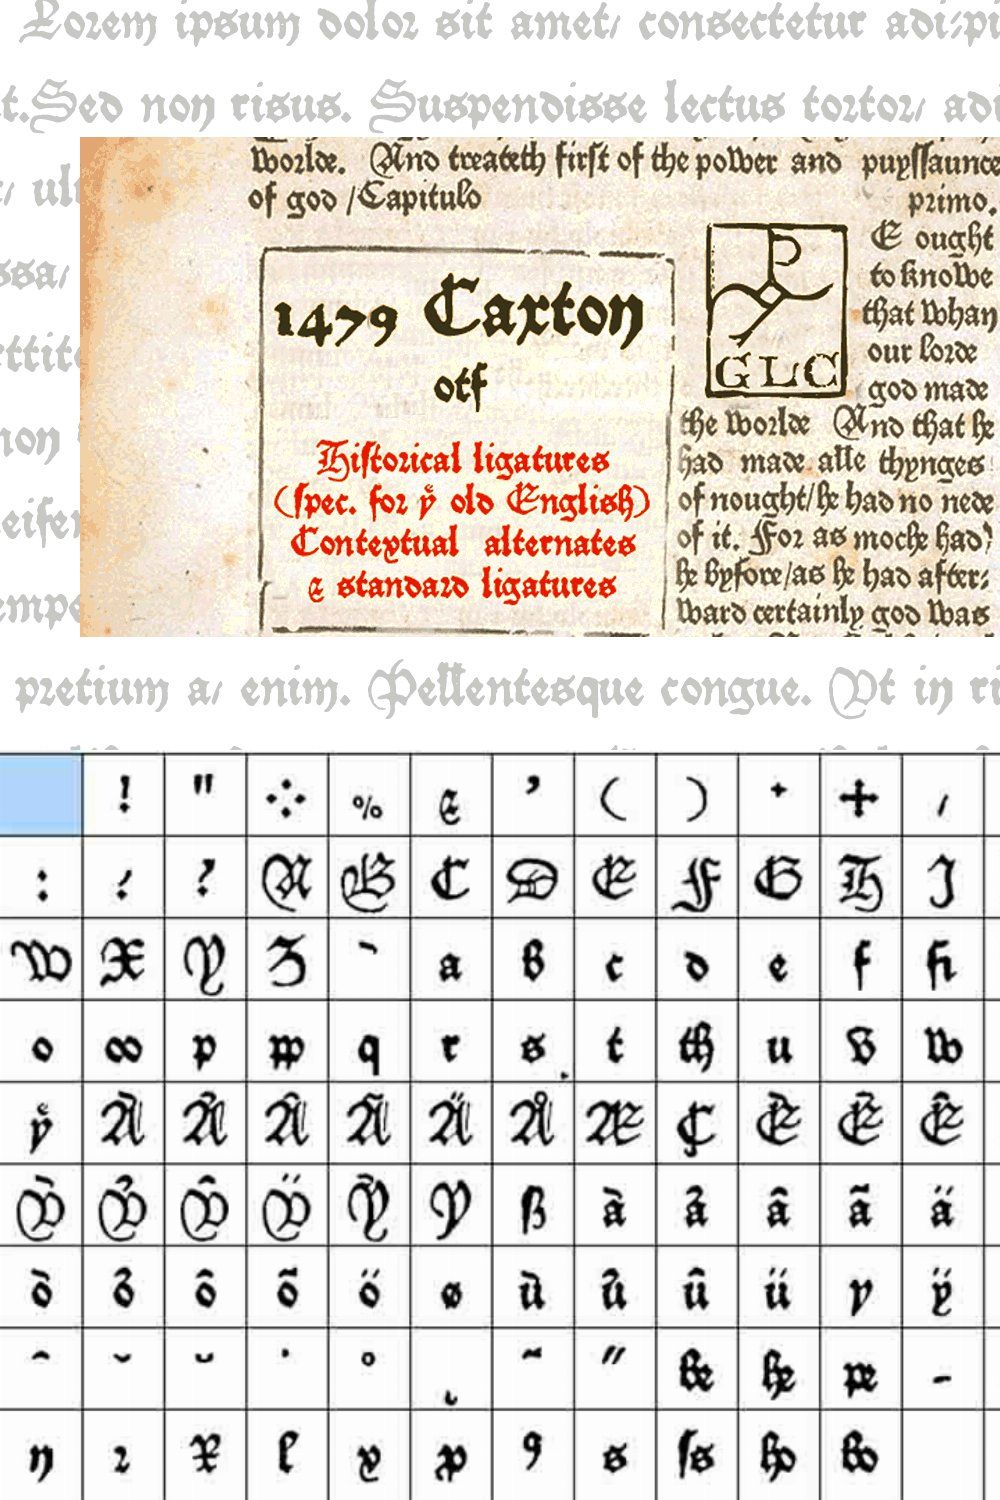 1479 Caxton OTF pinterest preview image.